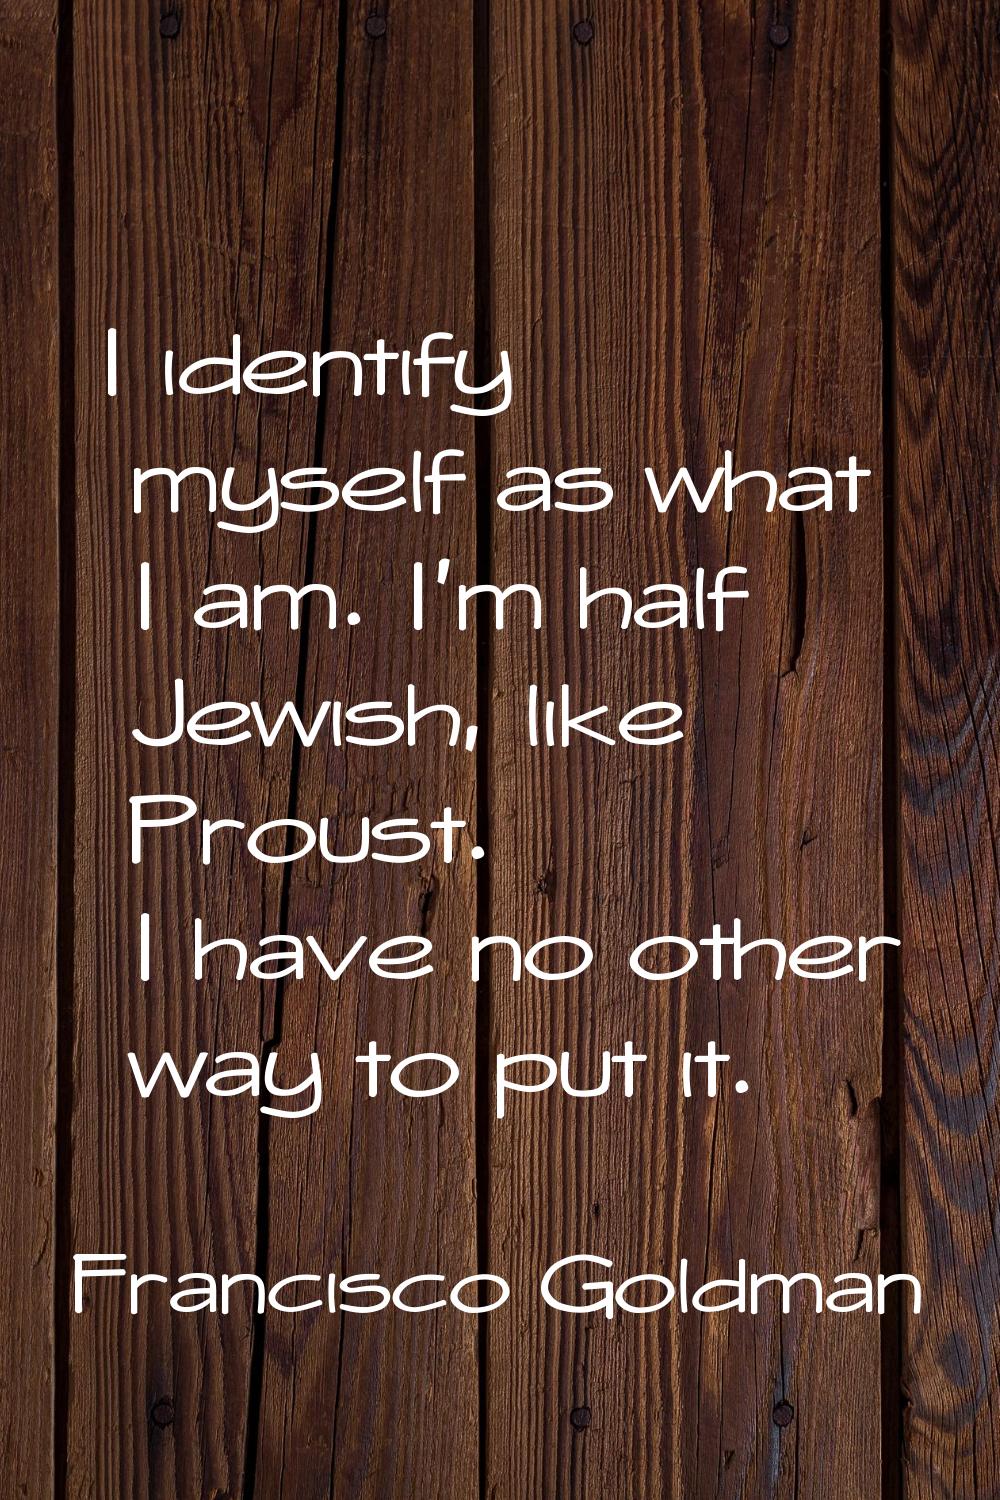 I identify myself as what I am. I'm half Jewish, like Proust. I have no other way to put it.